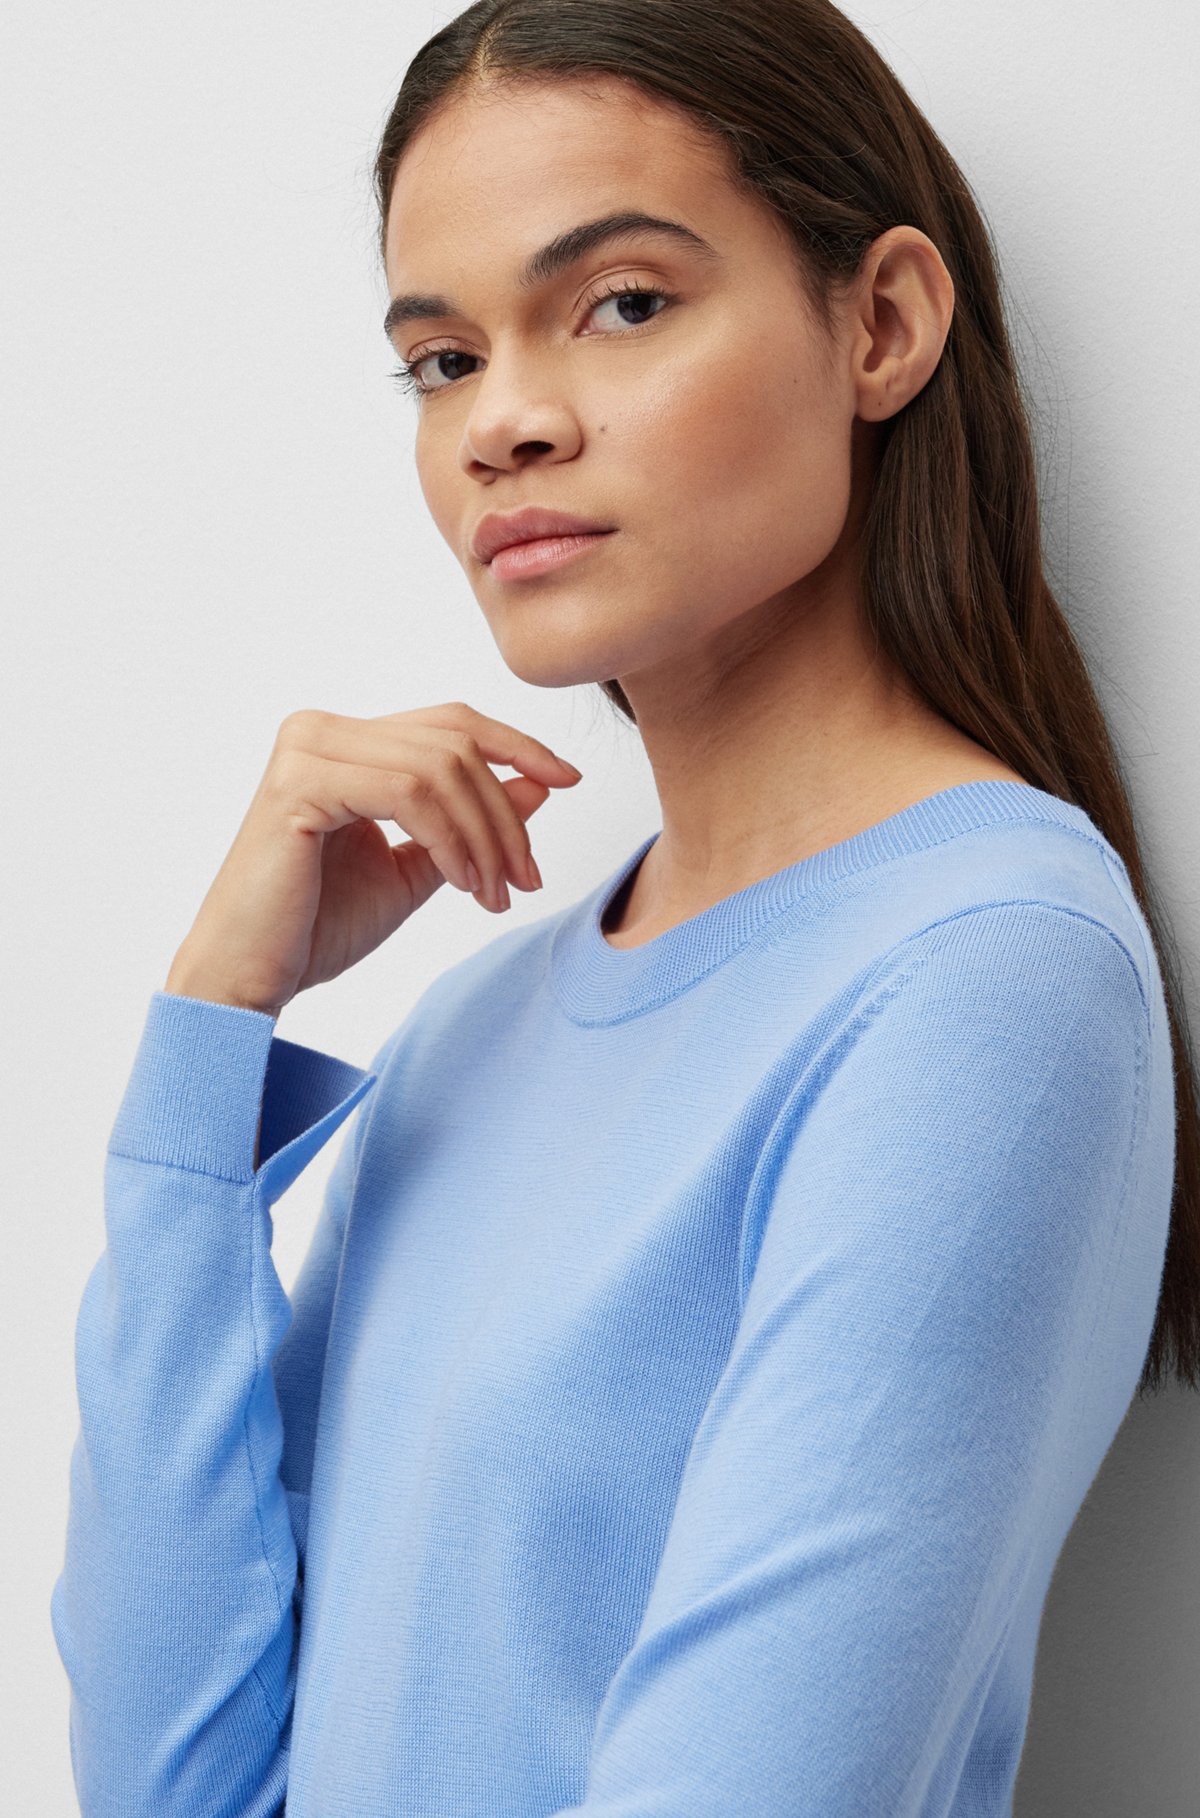 Crew-neck sweater in responsibly sourced merino wool, Light Blue